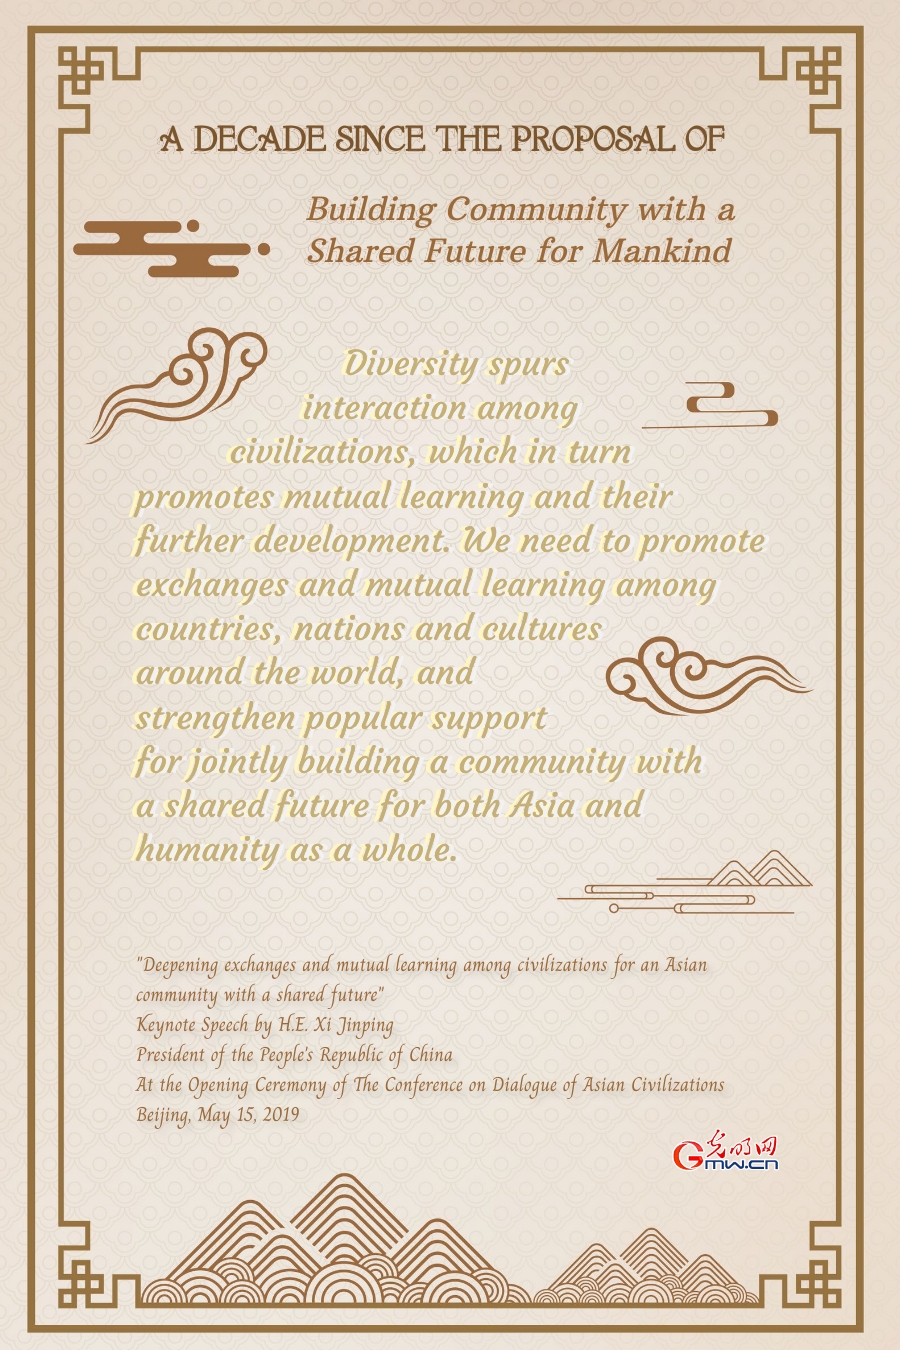 Review: A decade since the proposal of building community with a shared future for mankind